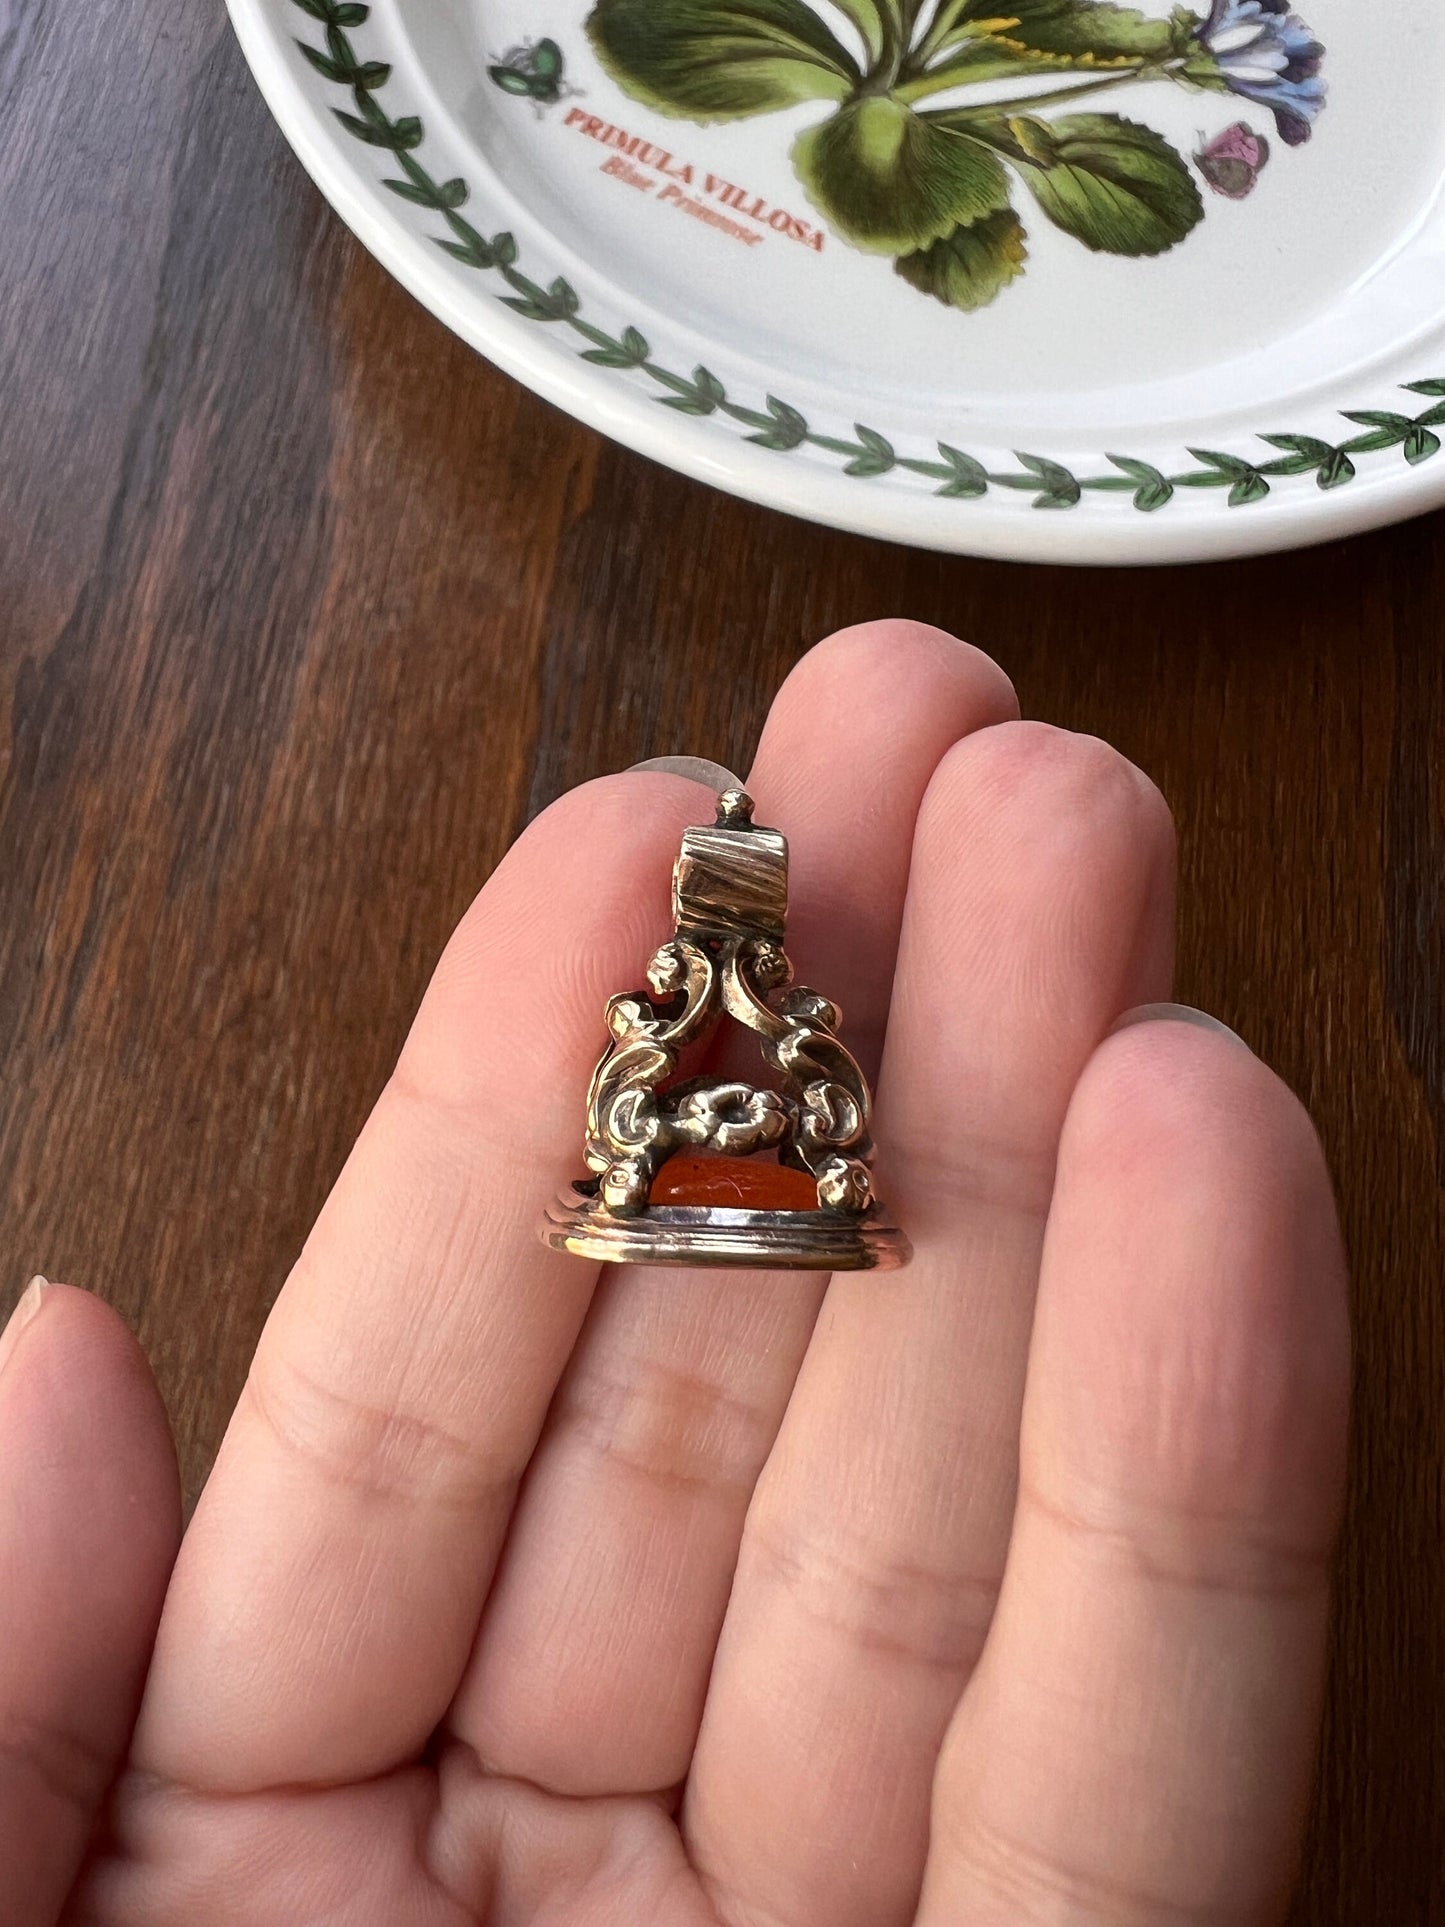 Antique " Me To You " REBUS Fob Victorian Wax Seal Pendant 10k Gold Carnelian Pansy Yew Tree Floral Romantic Gift Figural Whimsical